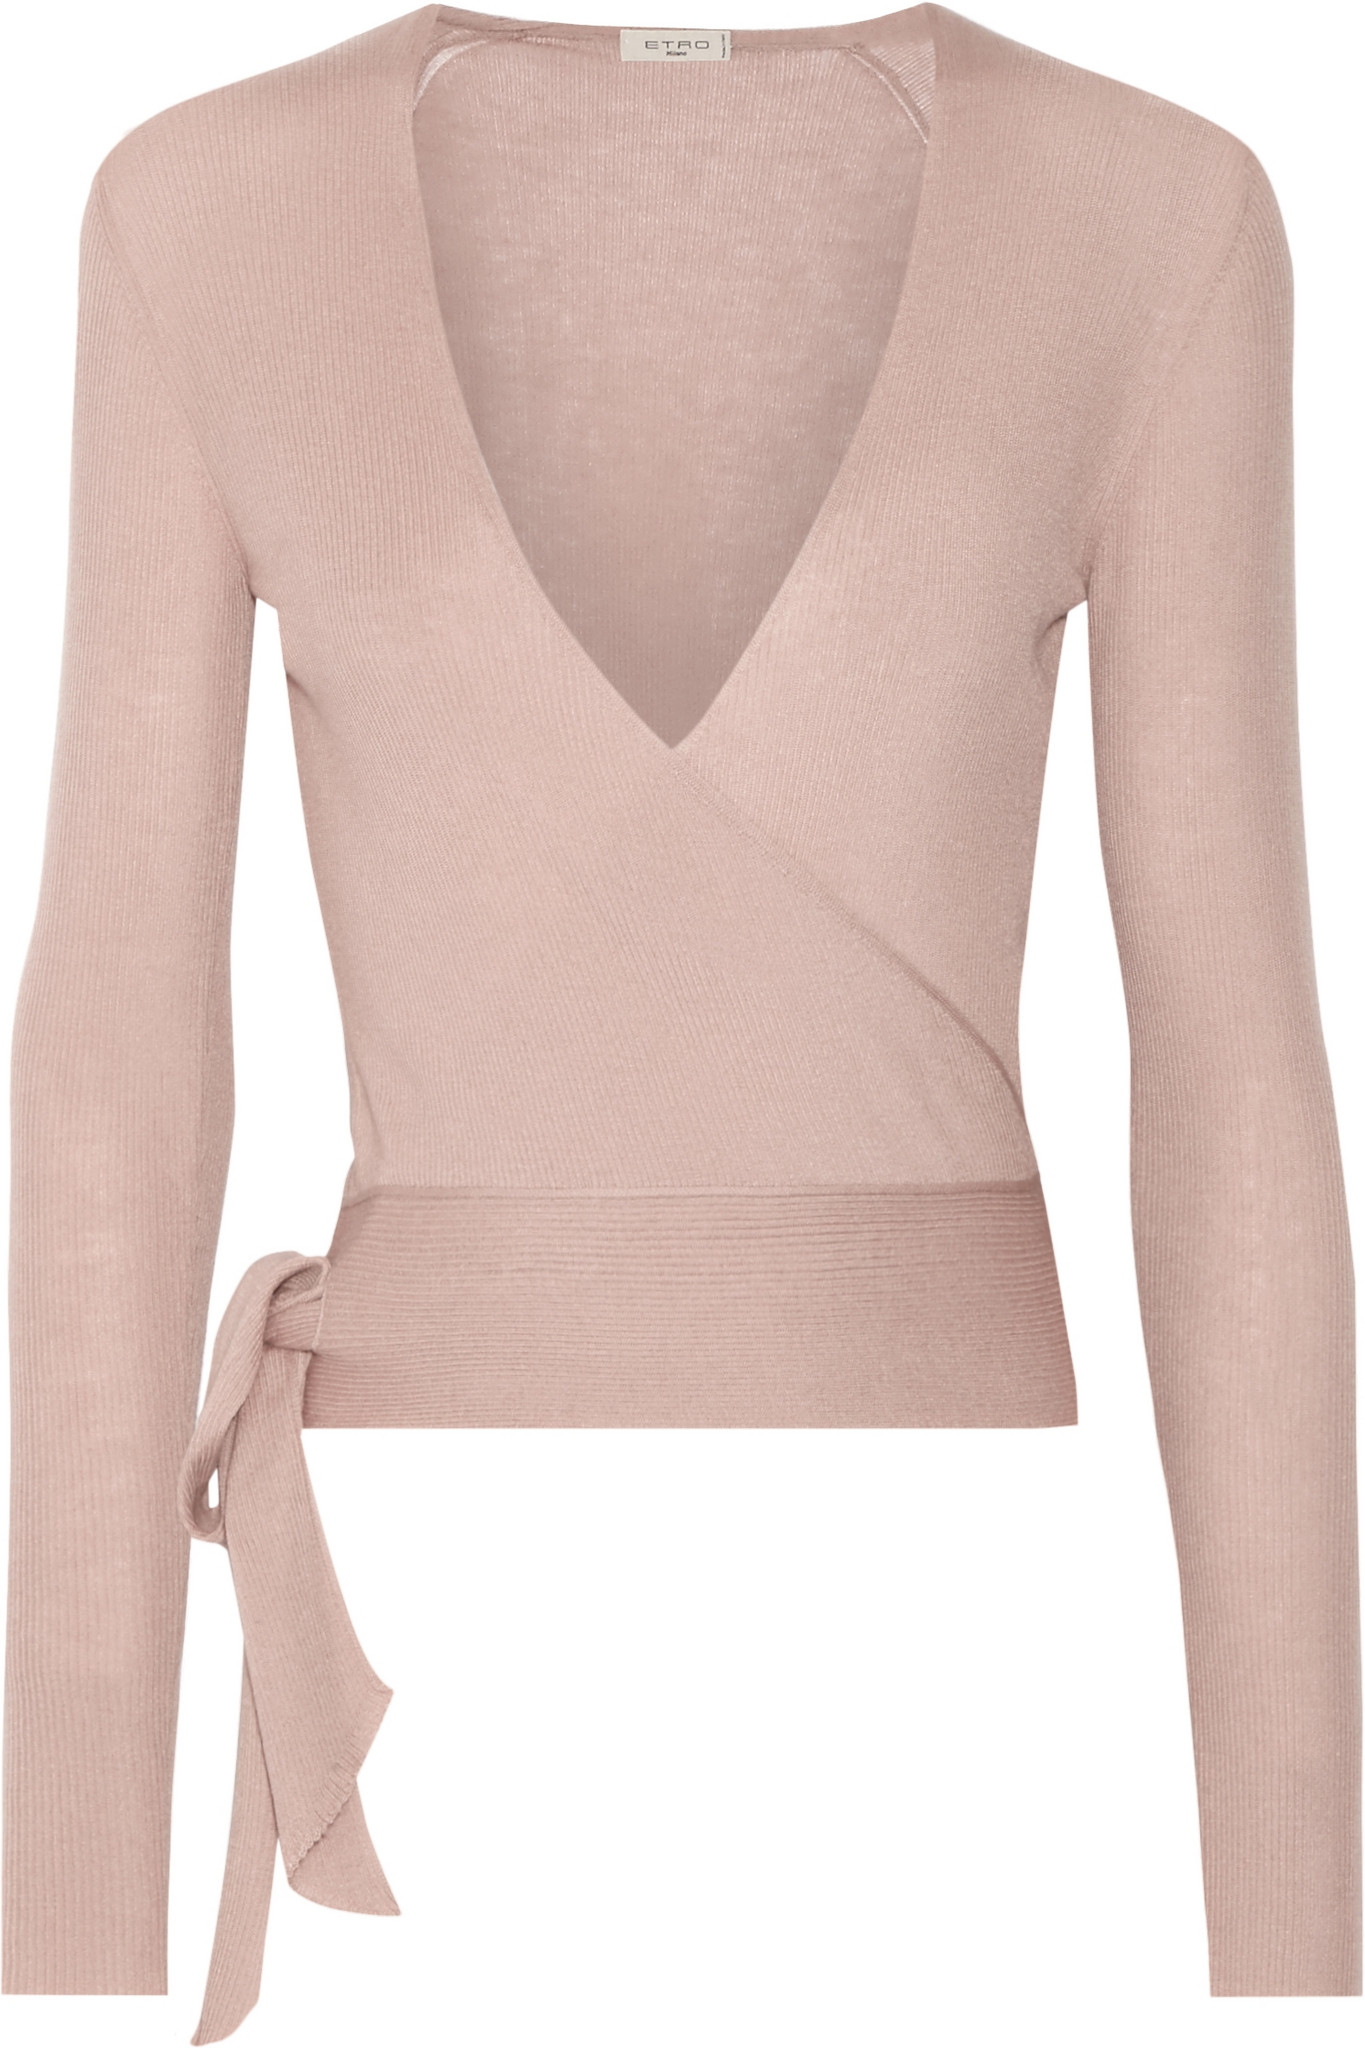 Etro - Ribbed Cashmere Wrap Cardigan - Blush in Pink - Lyst